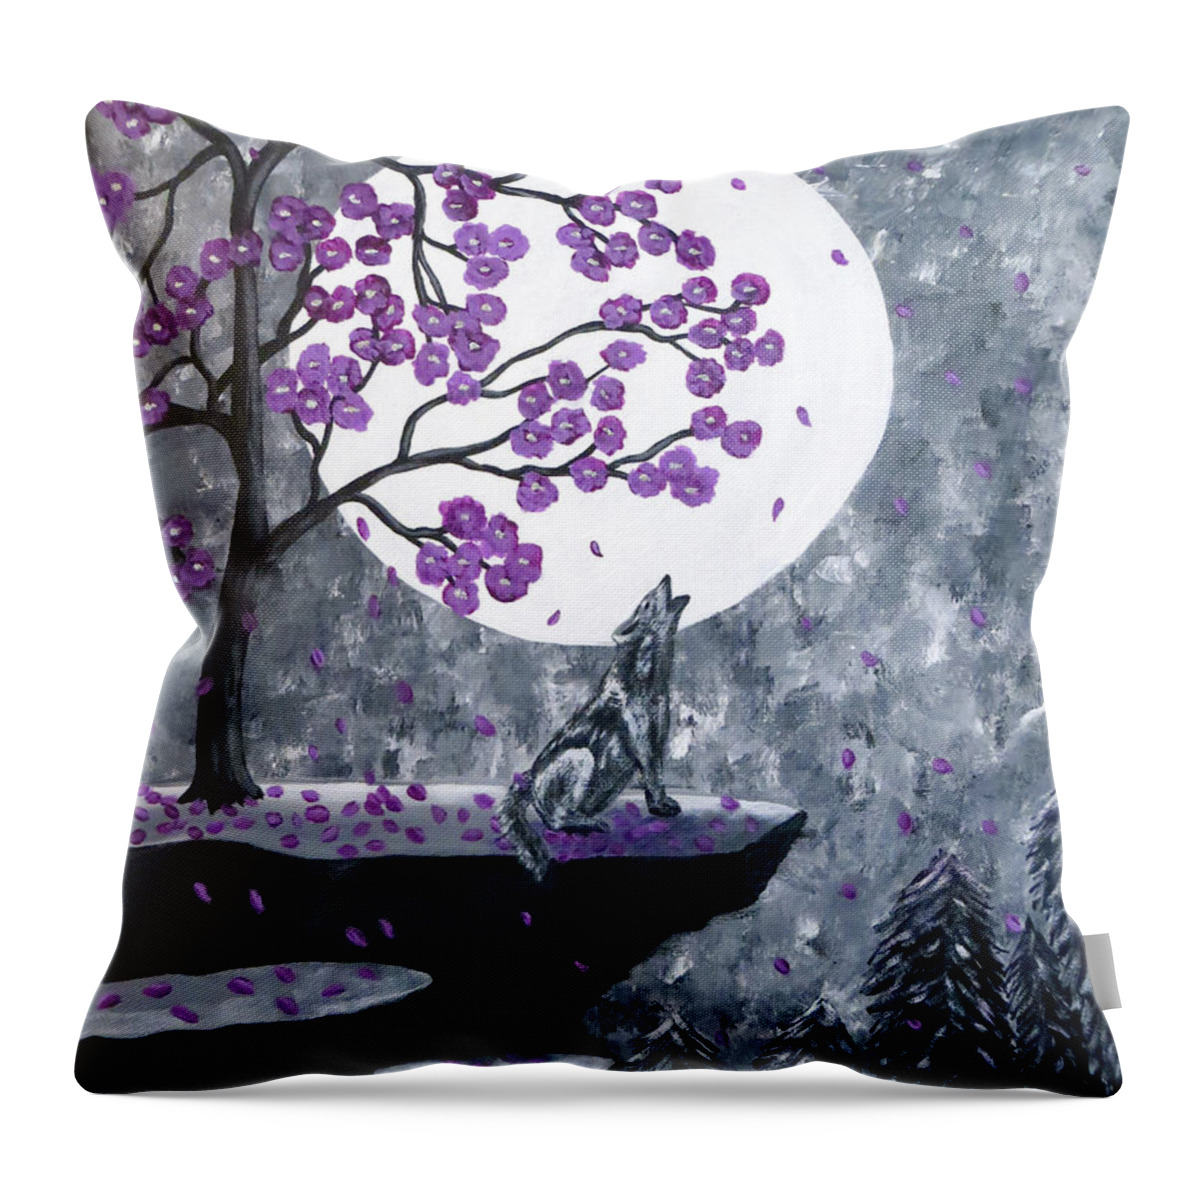 Animals Throw Pillow featuring the painting Full Moon Magic by Teresa Wing